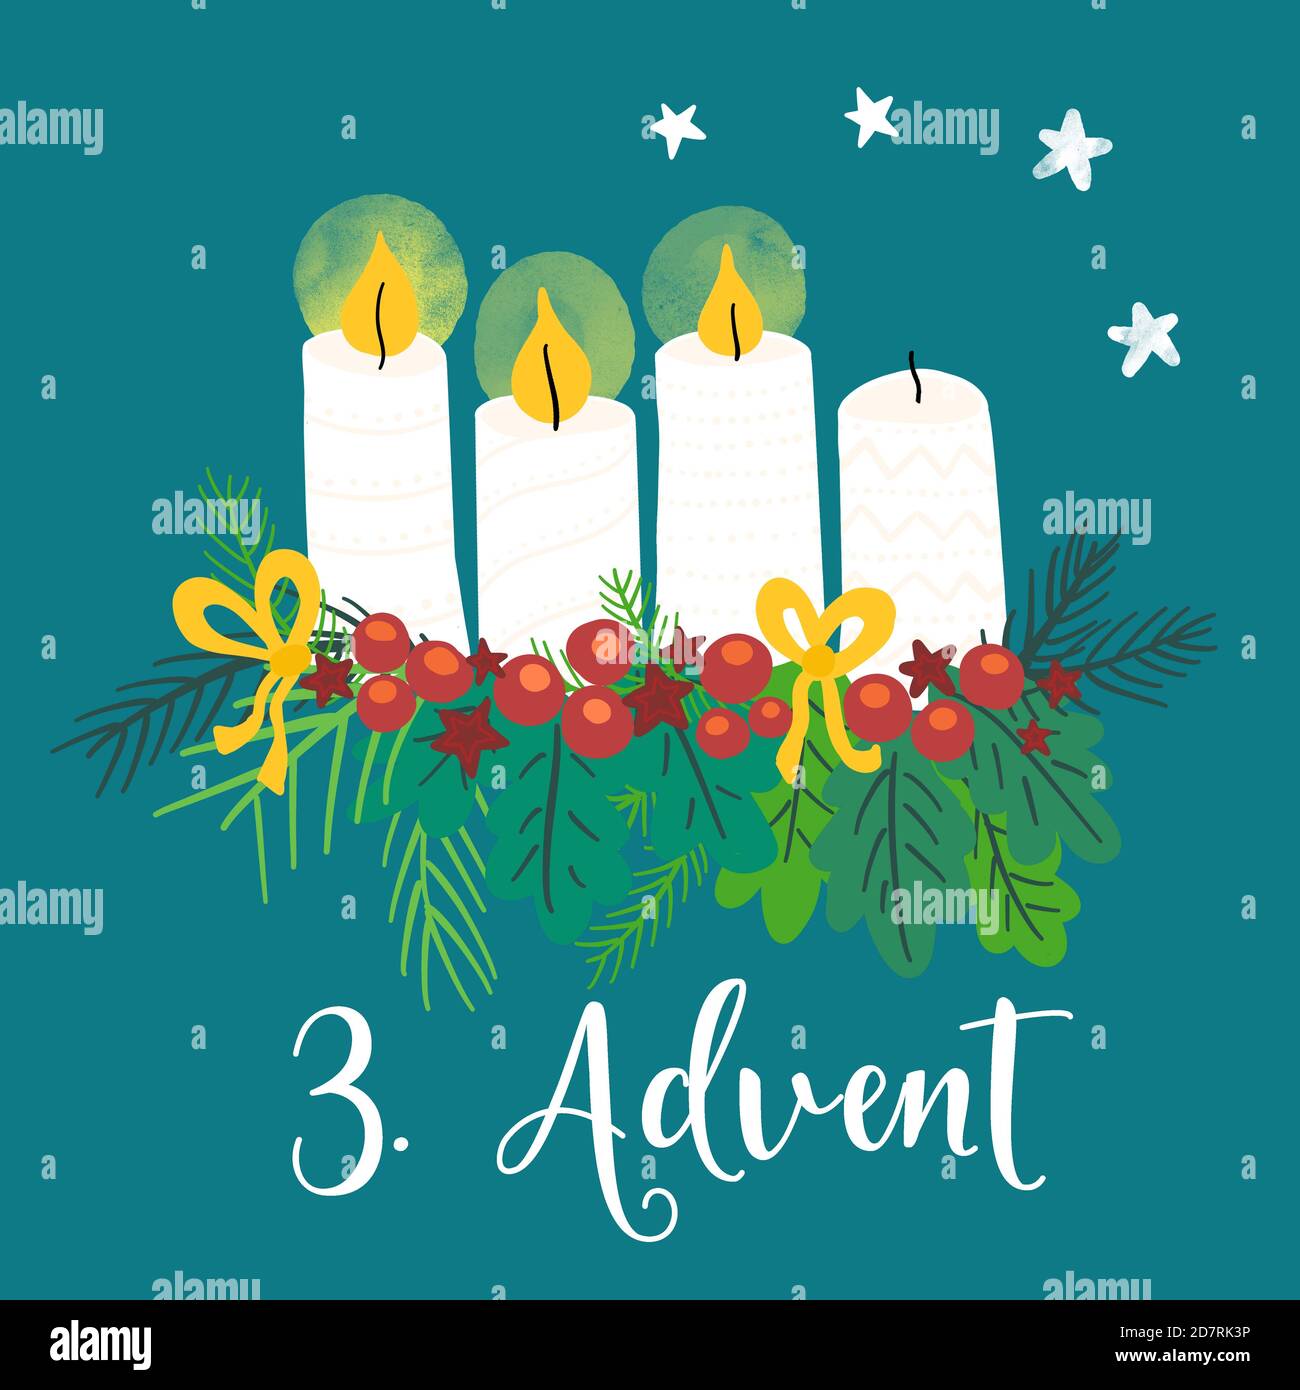 Advent wreath illustration. Christmas arrangements with 4 candles, two burning, bows, berries and pine branches. 2nd Advent. German holiday tradition Stock Photo